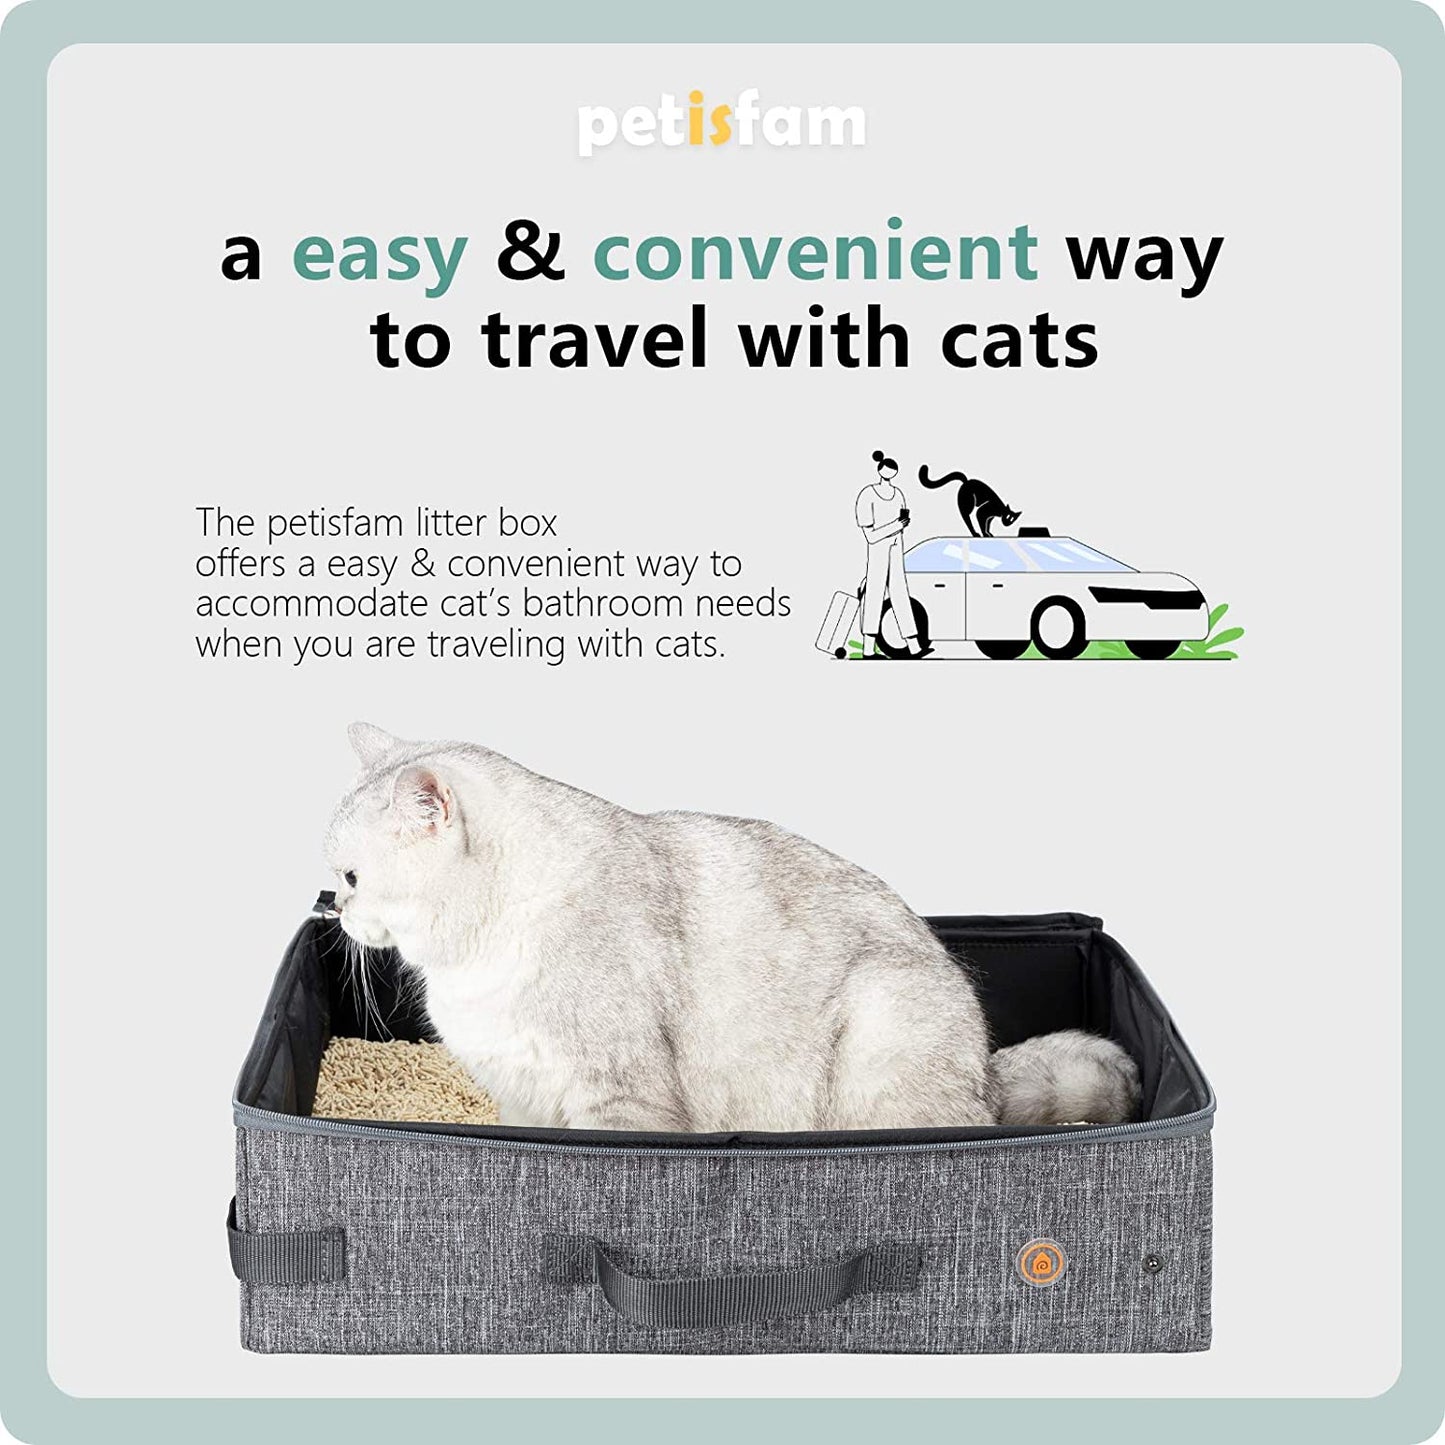 Large Portable Cat Travel Litter Box with Zipperd Top for Medium, Large or Multiple Cats. Odor Control, Leak-Proof, Lightweight for Easy Carry, Easy Storage, Easy to Clean